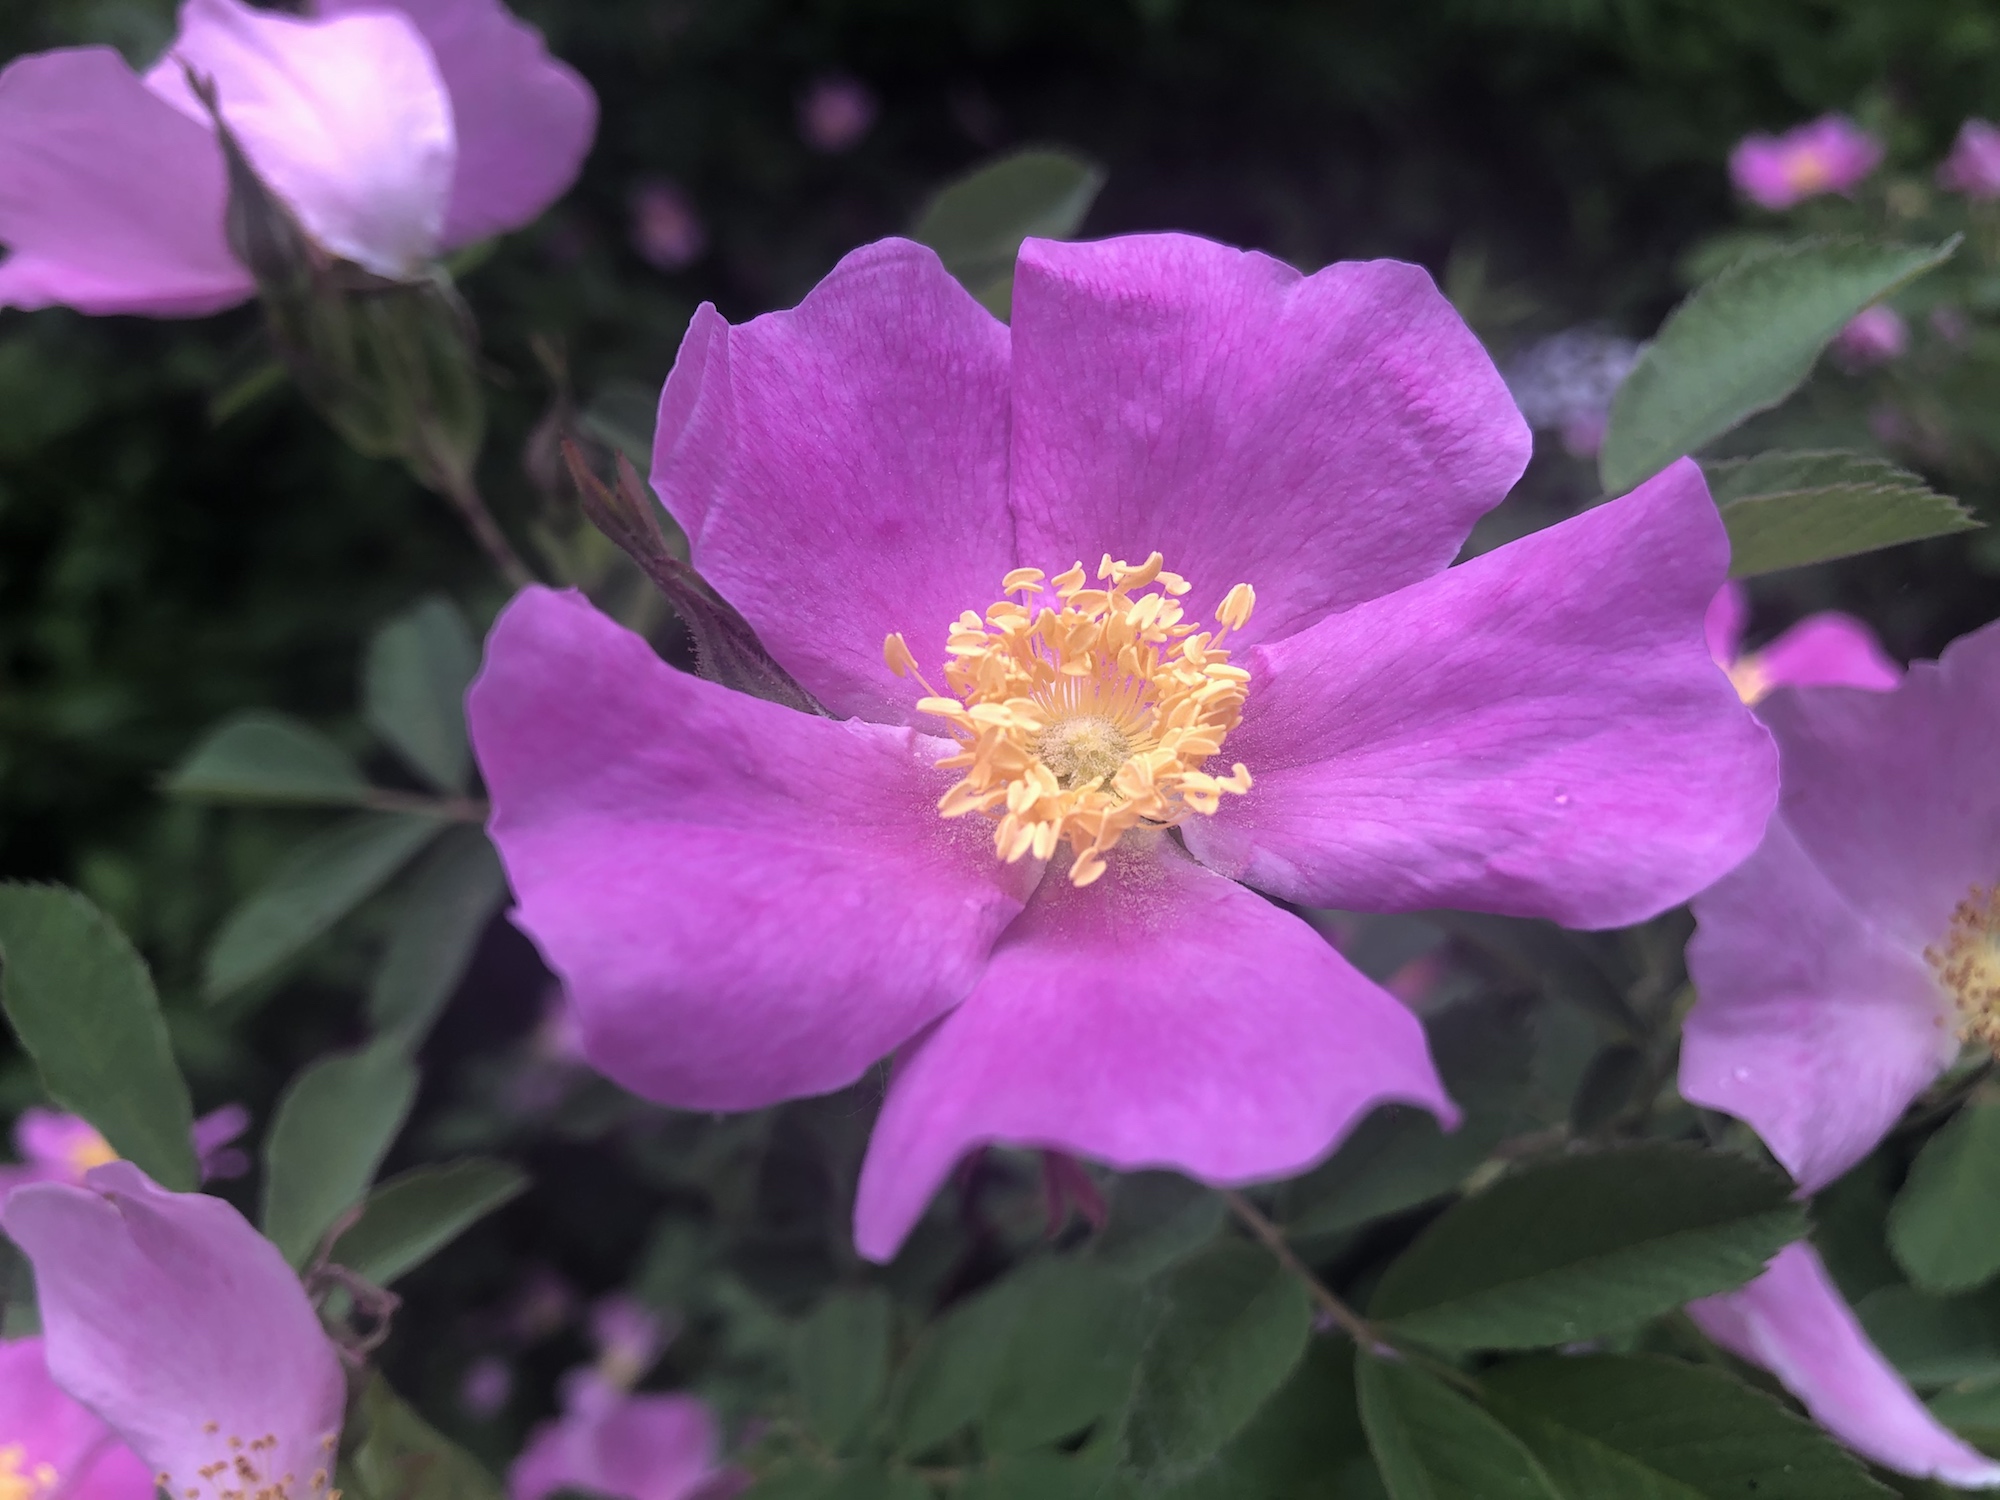 Prarie Rose (Rosa arkansana) by Duck Pond stone wall in Madison, Wisconsin on June 5, 2020.